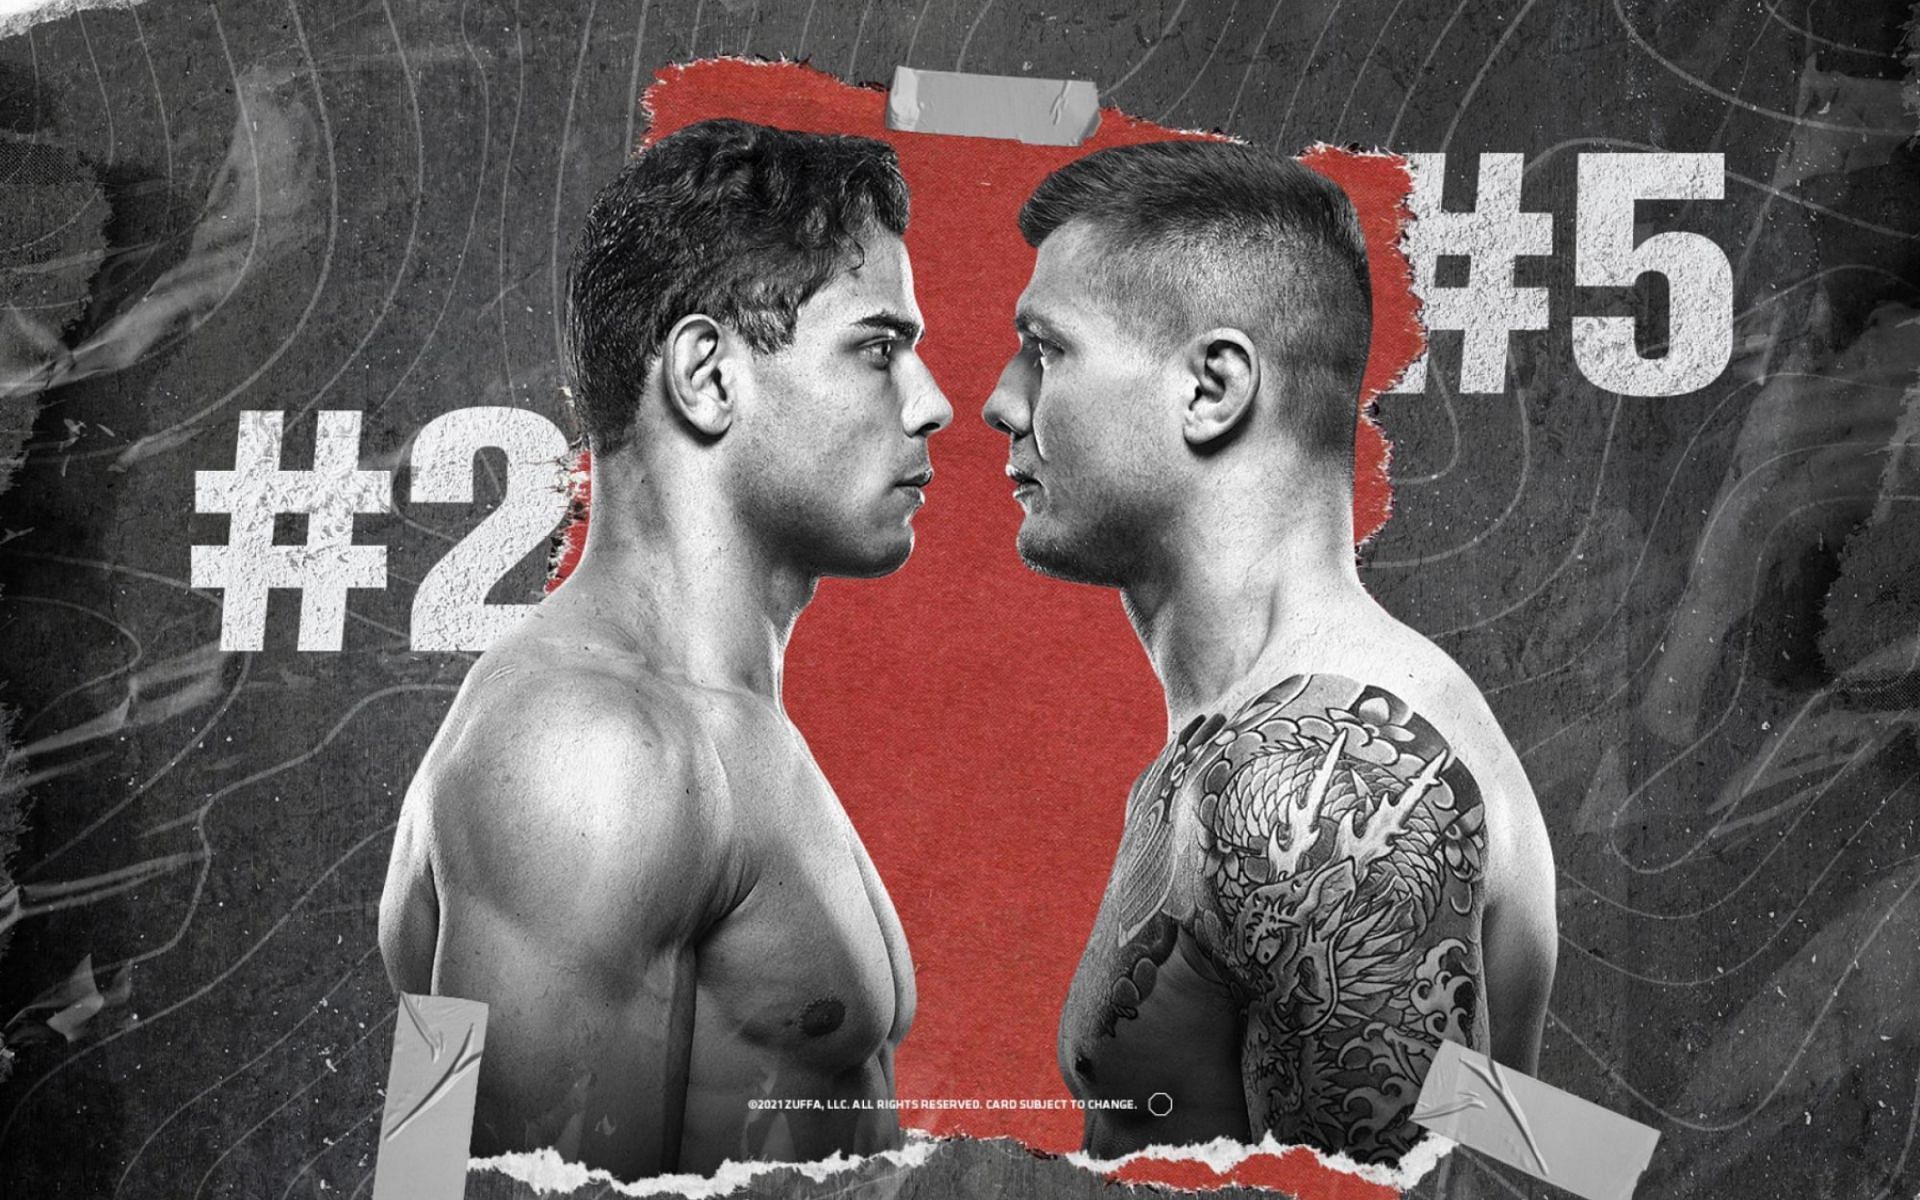 Paulo Costa fights Marvin &lt;a href=&#039;https://www.sportskeeda.com/player/marvin-vettori&#039; target=&#039;_blank&#039; rel=&#039;noopener noreferrer&#039;&gt;Vettori&lt;/a&gt; in the main event of this weekend&#039;s UFC show